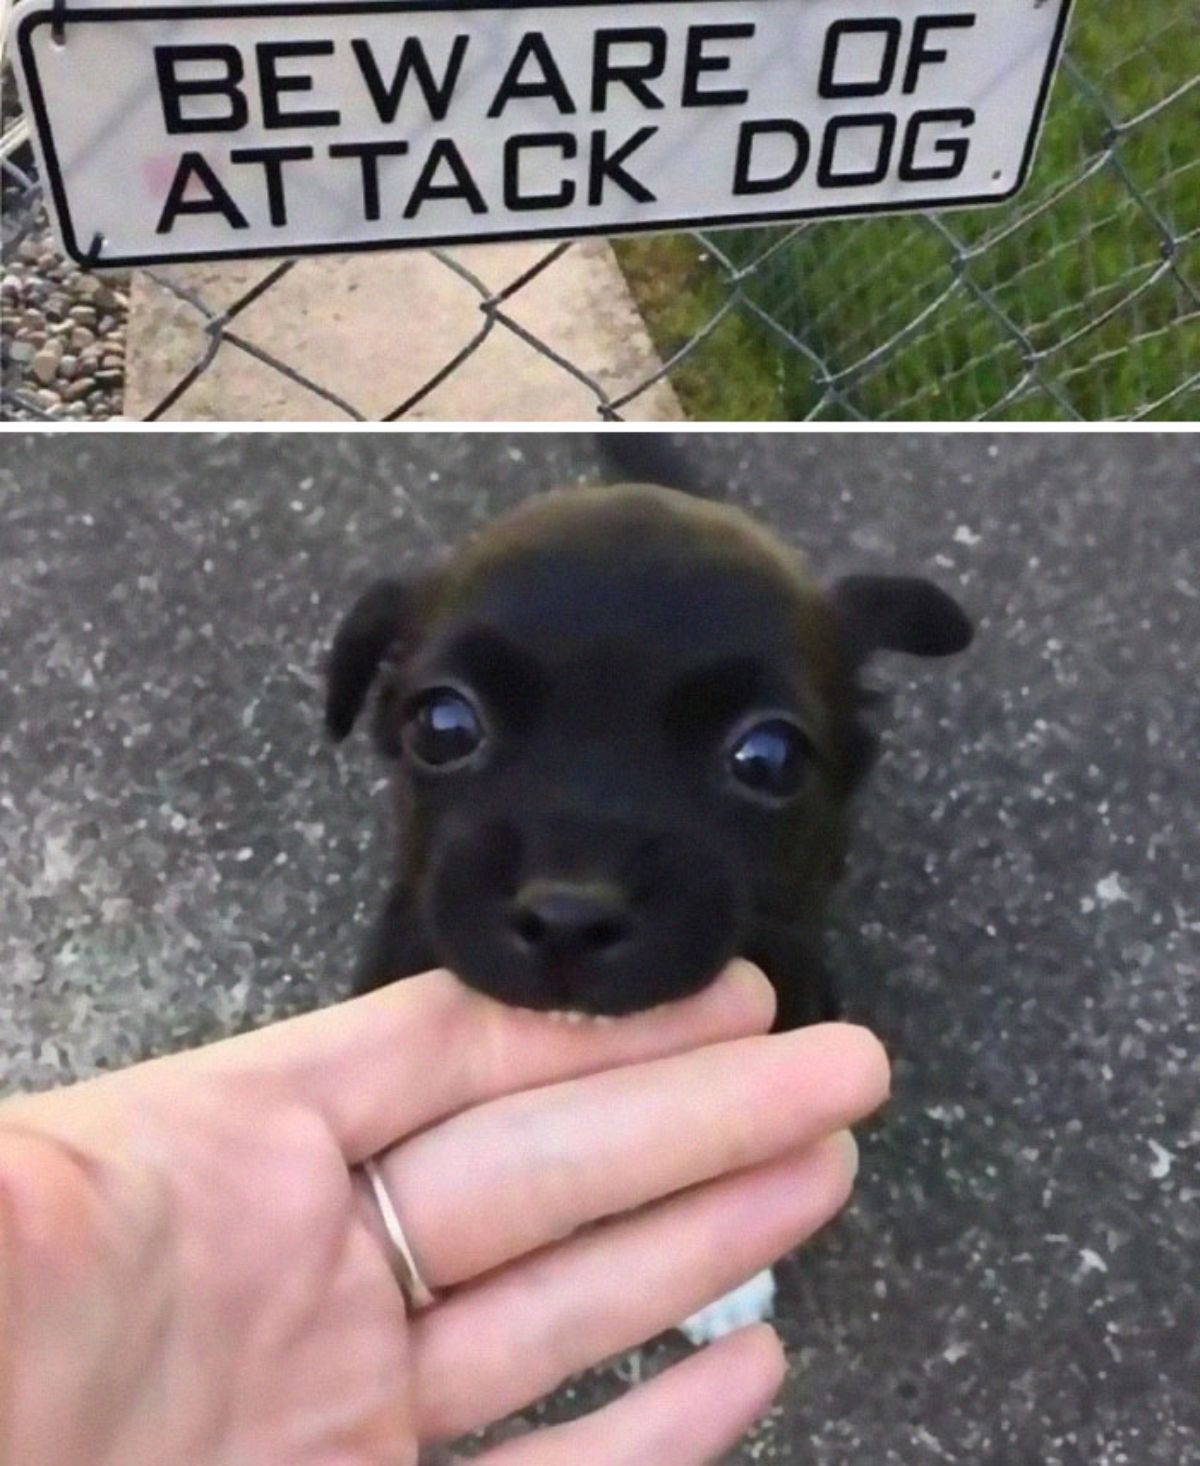 1 photo of a black and white sign saying BEWARE OF ATTACK DOG and 1 photo of a tiny black puppy biting someone's finger